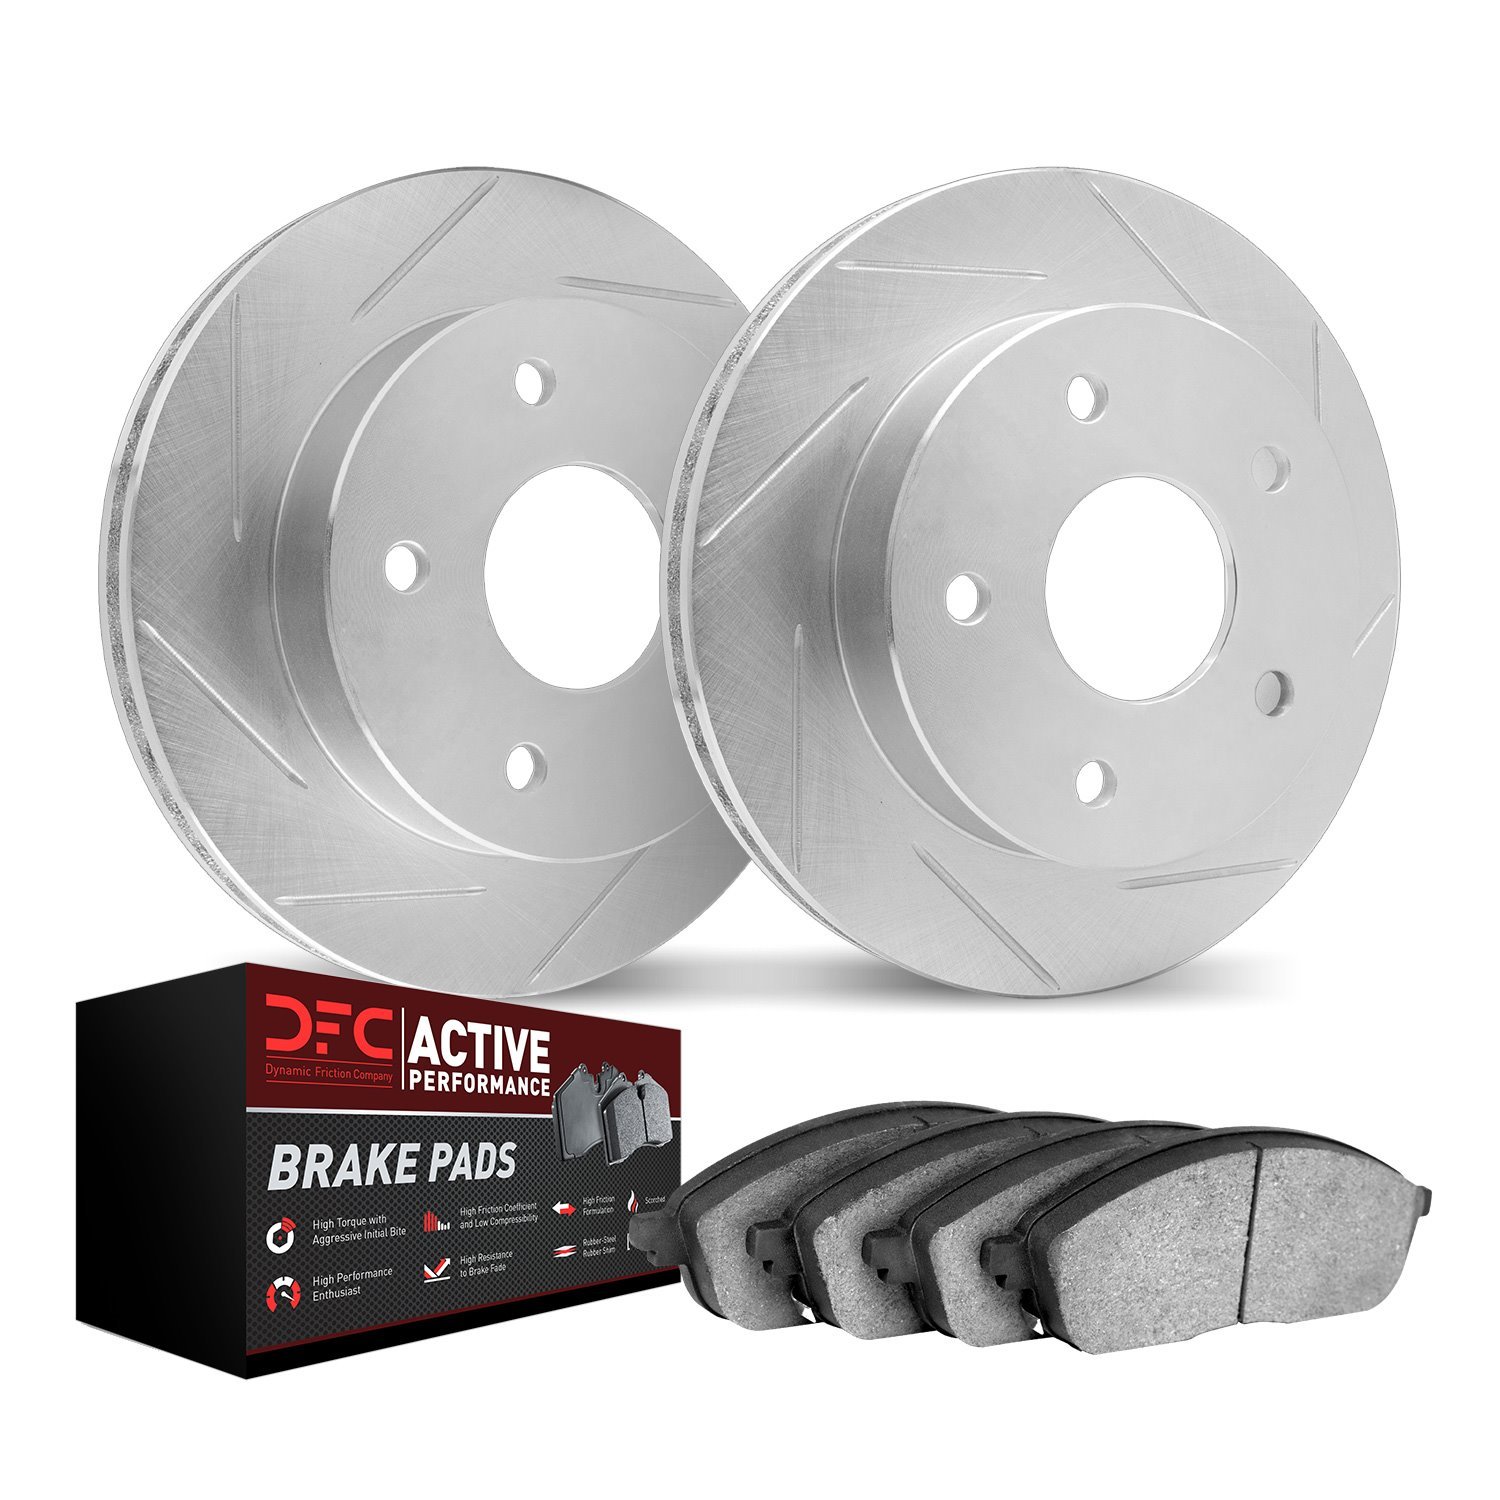 2702-74036 Geoperformance Slotted Brake Rotors with Active Performance Pads Kits, 1999-2005 Audi/Volkswagen, Position: Rear